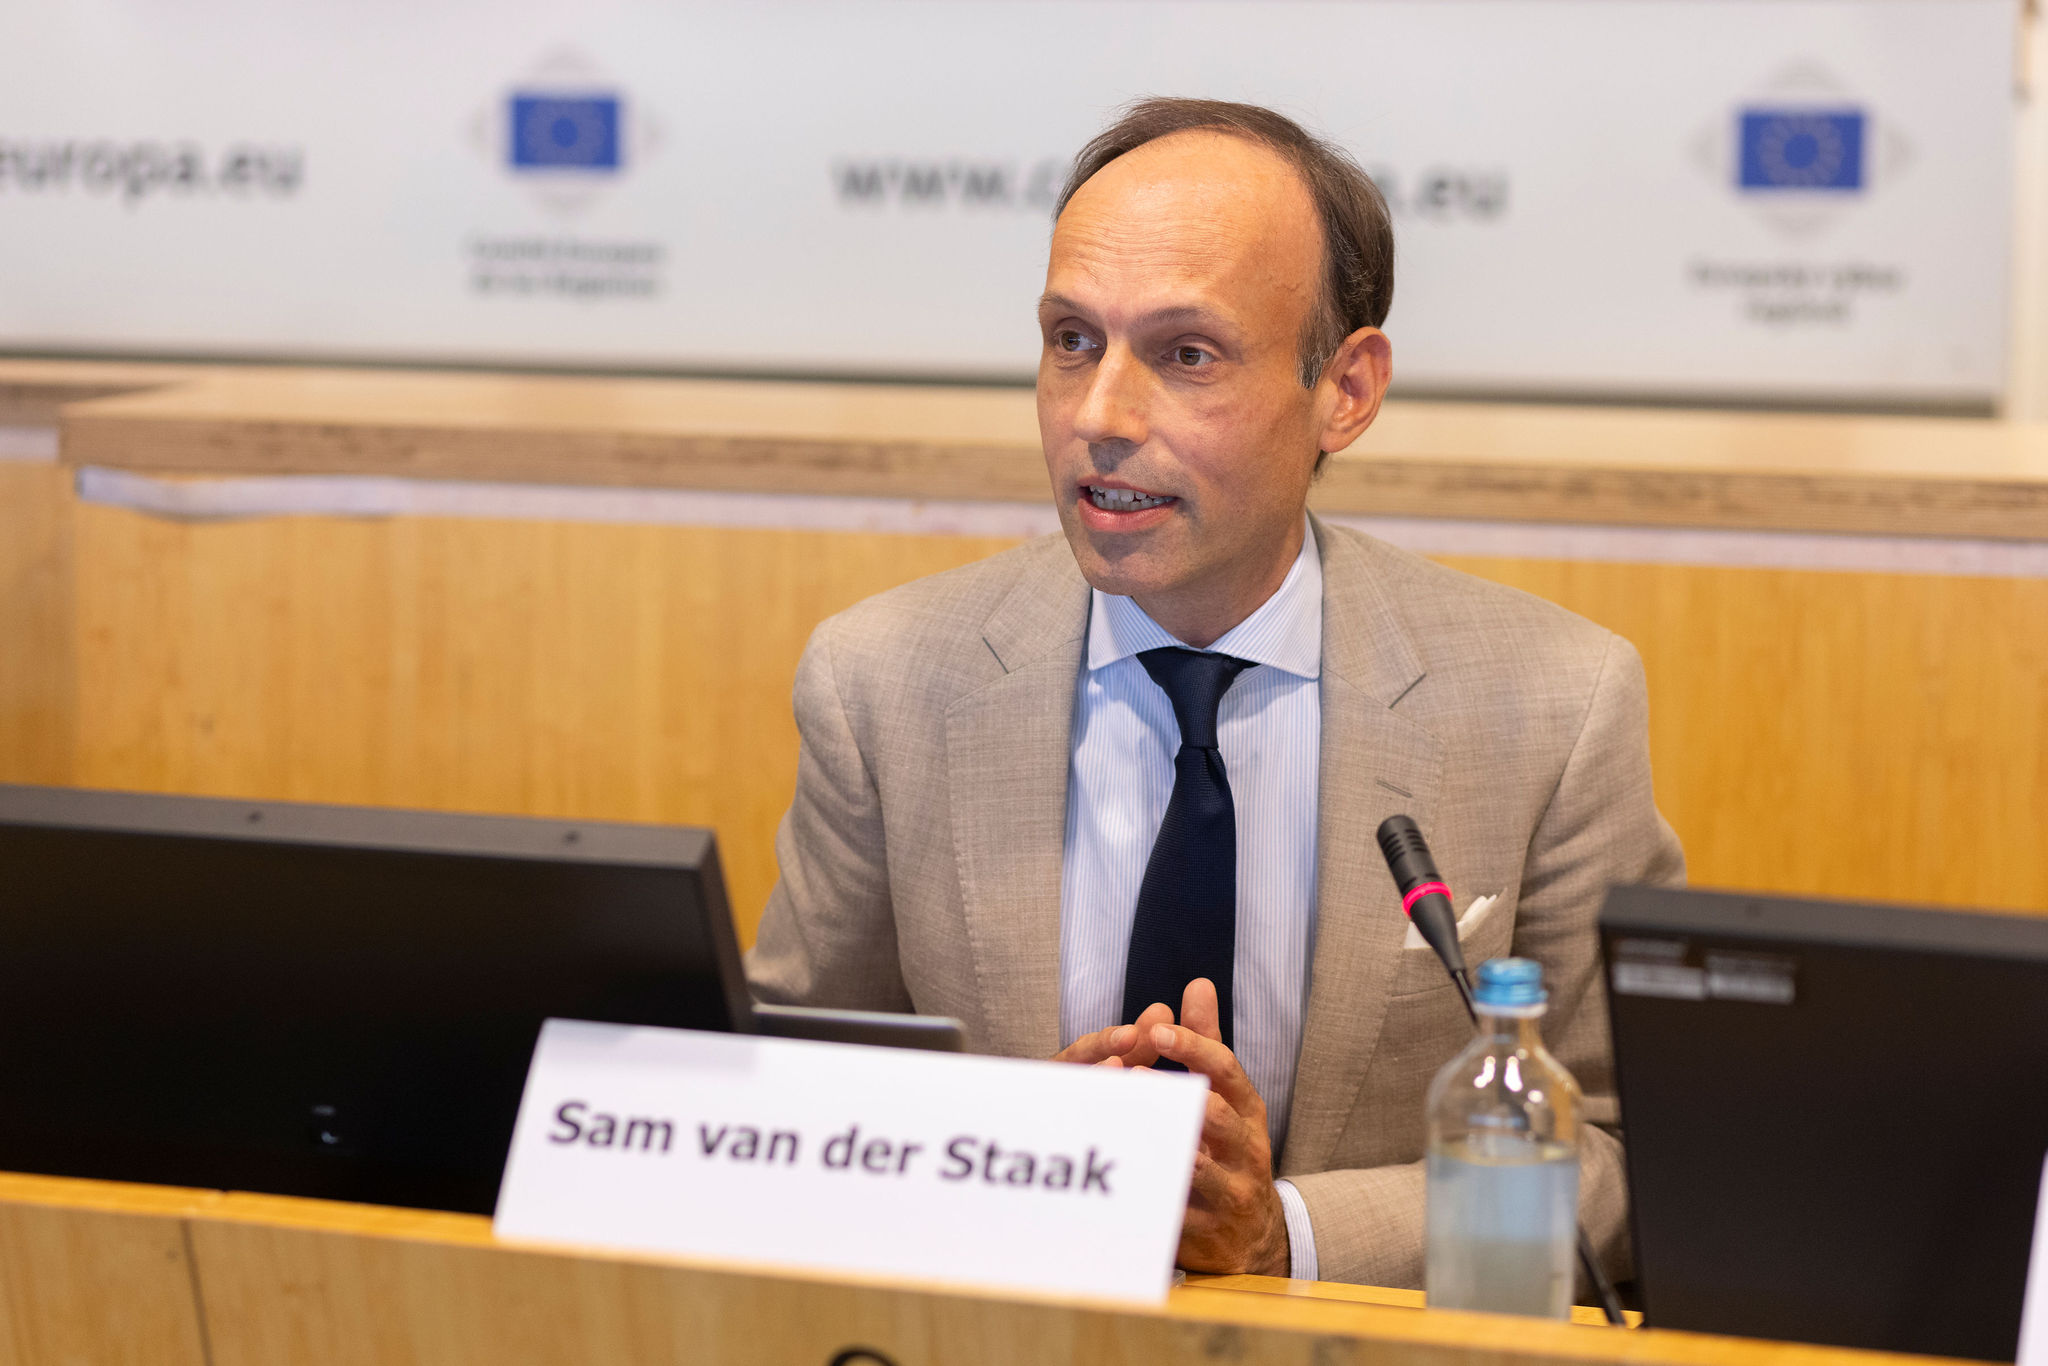 “The EU is strongest when its Members collaborate and when it is united in its geopolitical might. But as soon as the EU separates its geopolitical interests from its values, it cannot play its geopolitical weight.”, Sam van der Staak, Director for Europe of International IDEA.